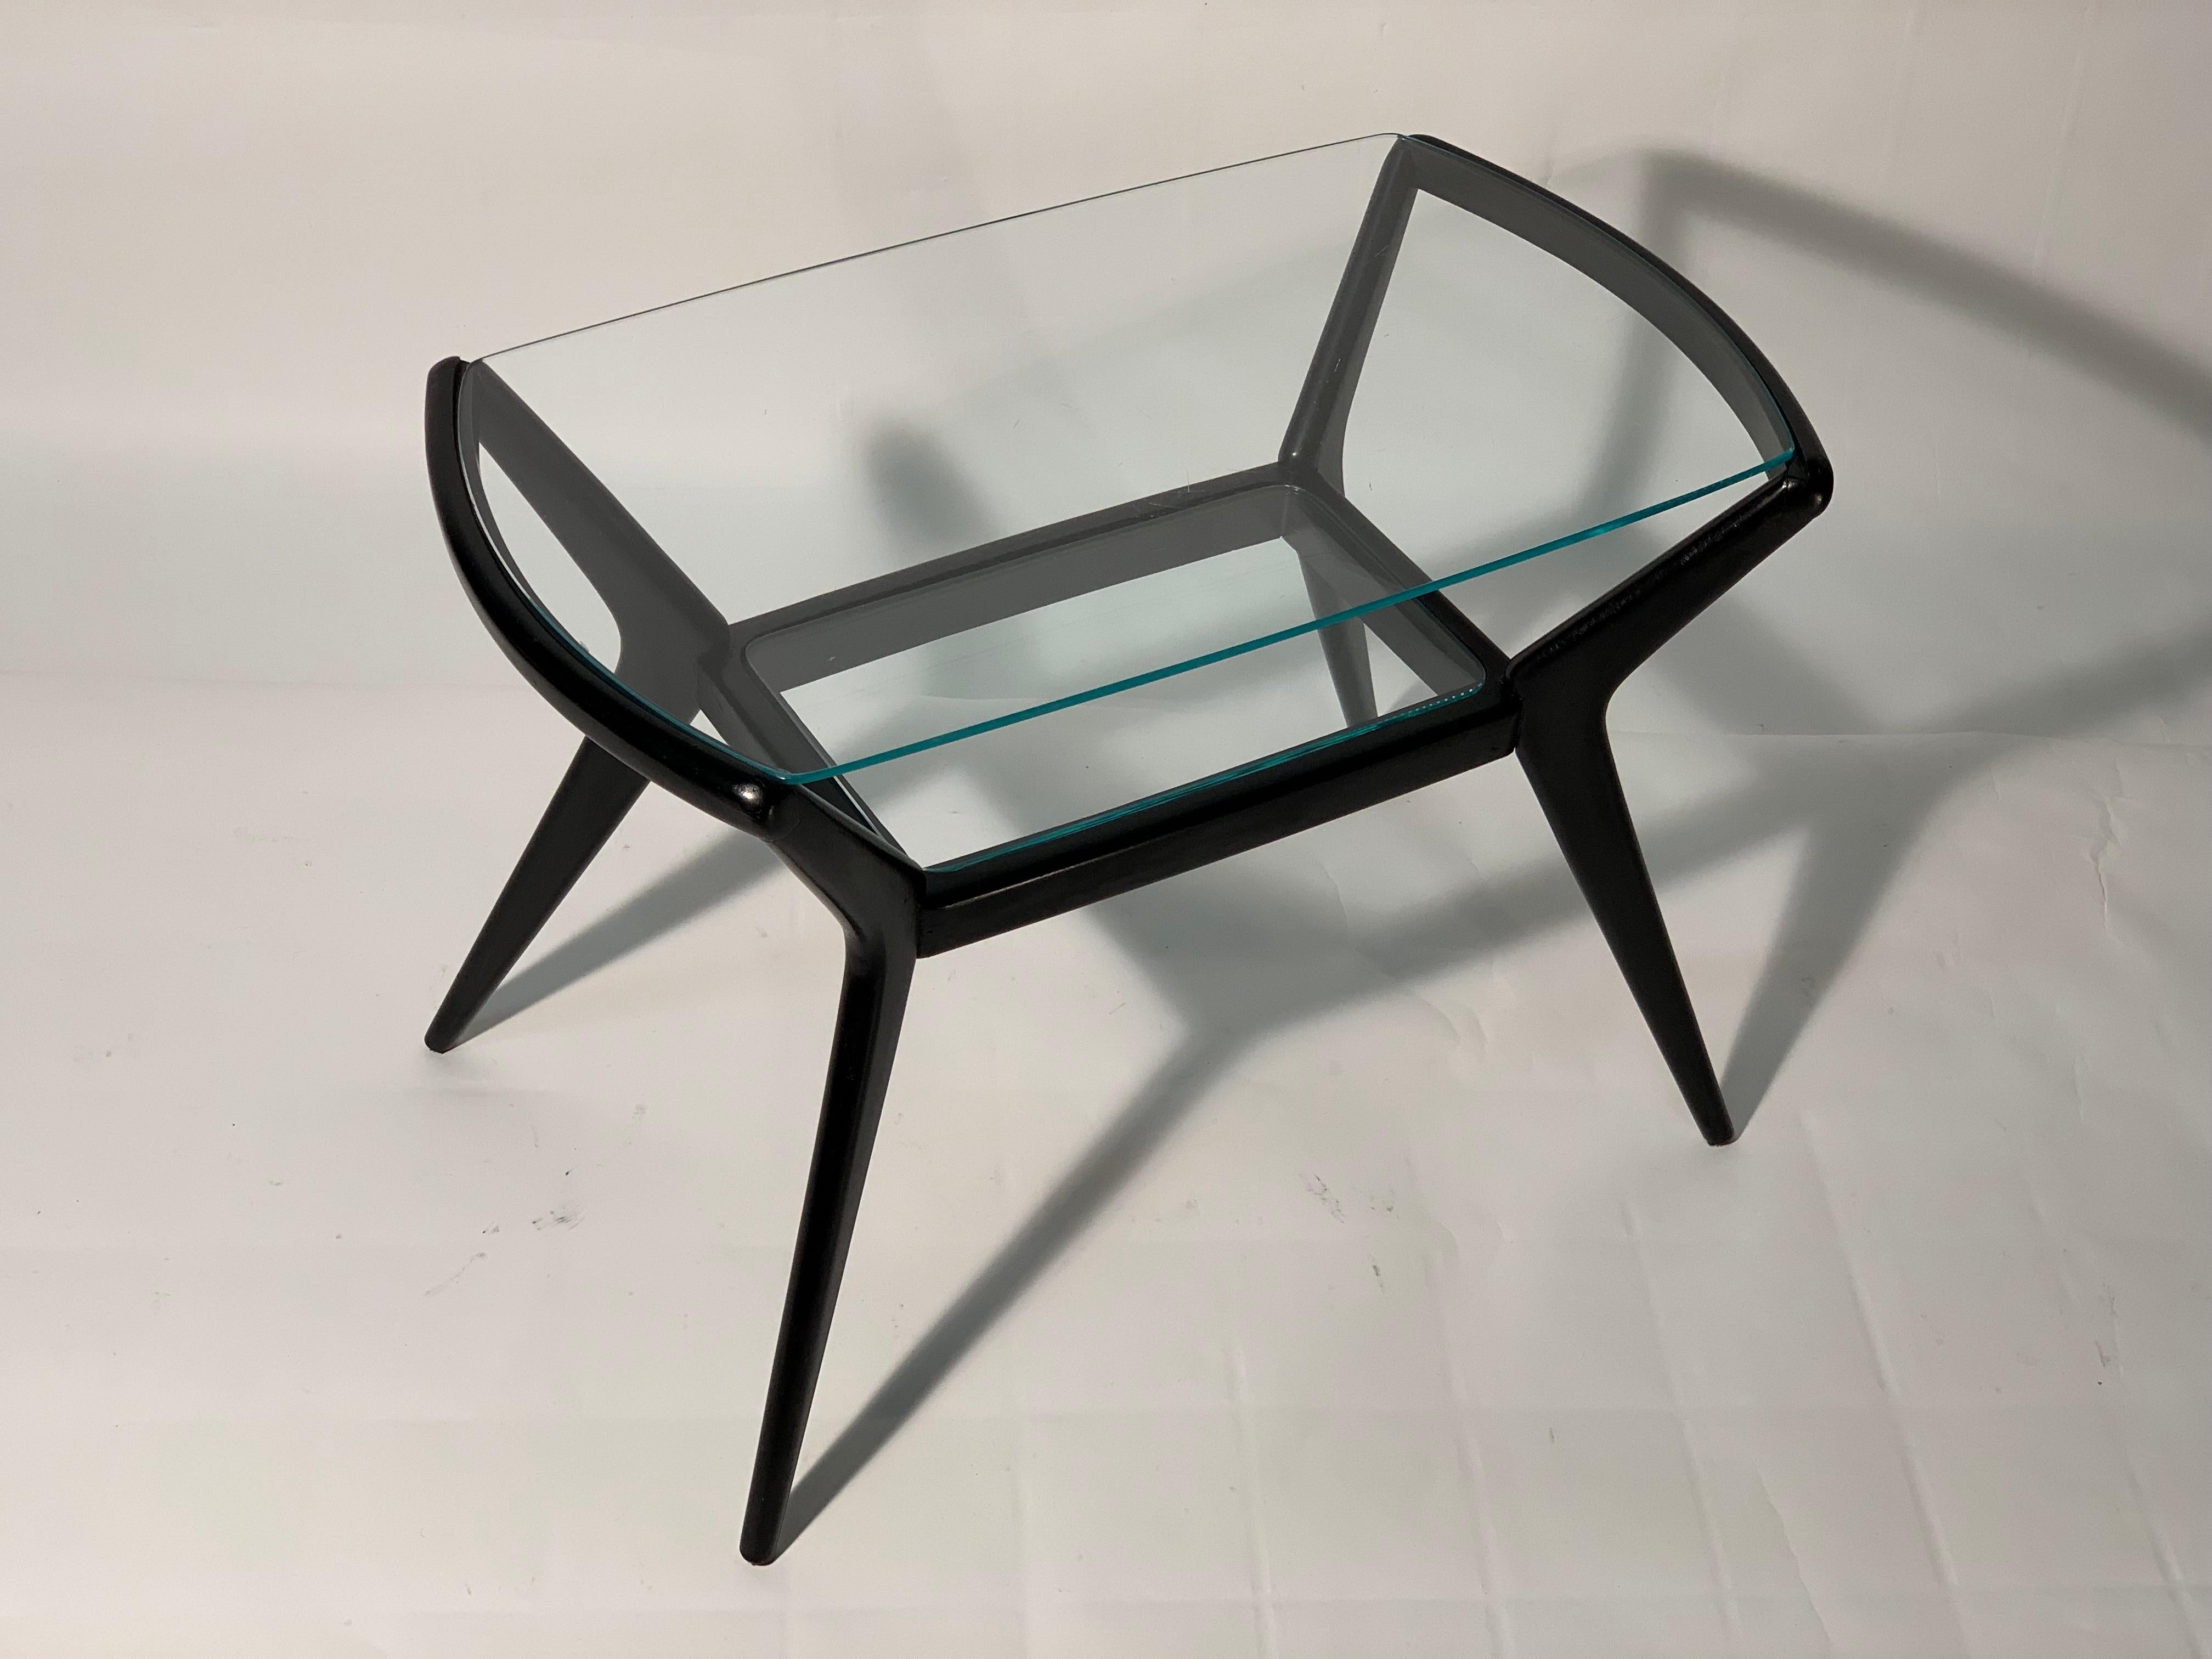 Italian midcentury 1950s double beveled glass shelves encased in a curved black lacquered wood structures.
The two shelves are supported by four elegant, strongly inclined, slender legs that taper towards the bottom.
This table can be used like